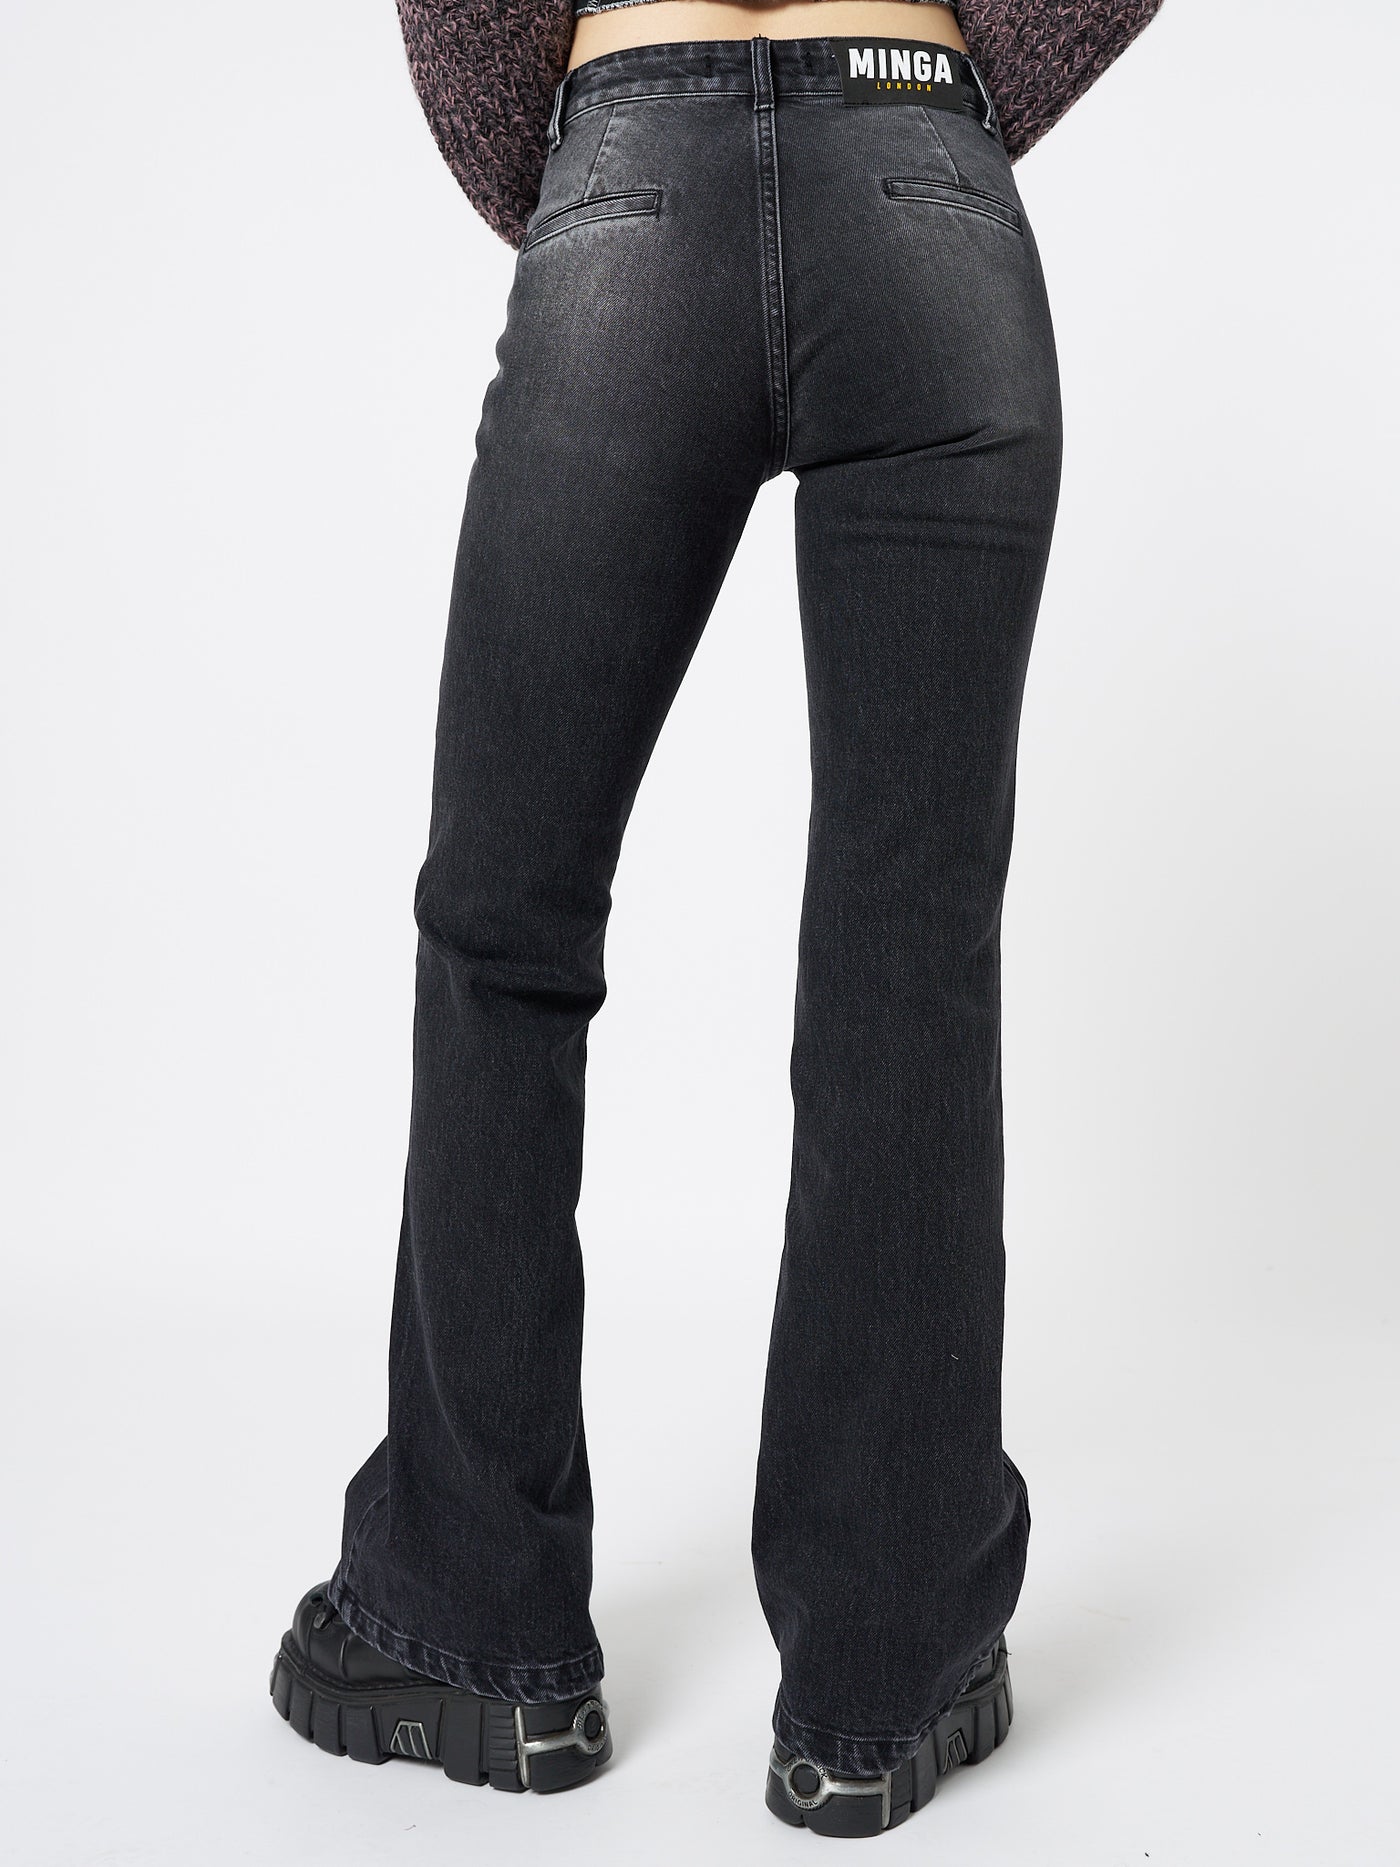 These black flare jeans feature a classic front pocket design, offering a timeless and versatile option for your everyday style.